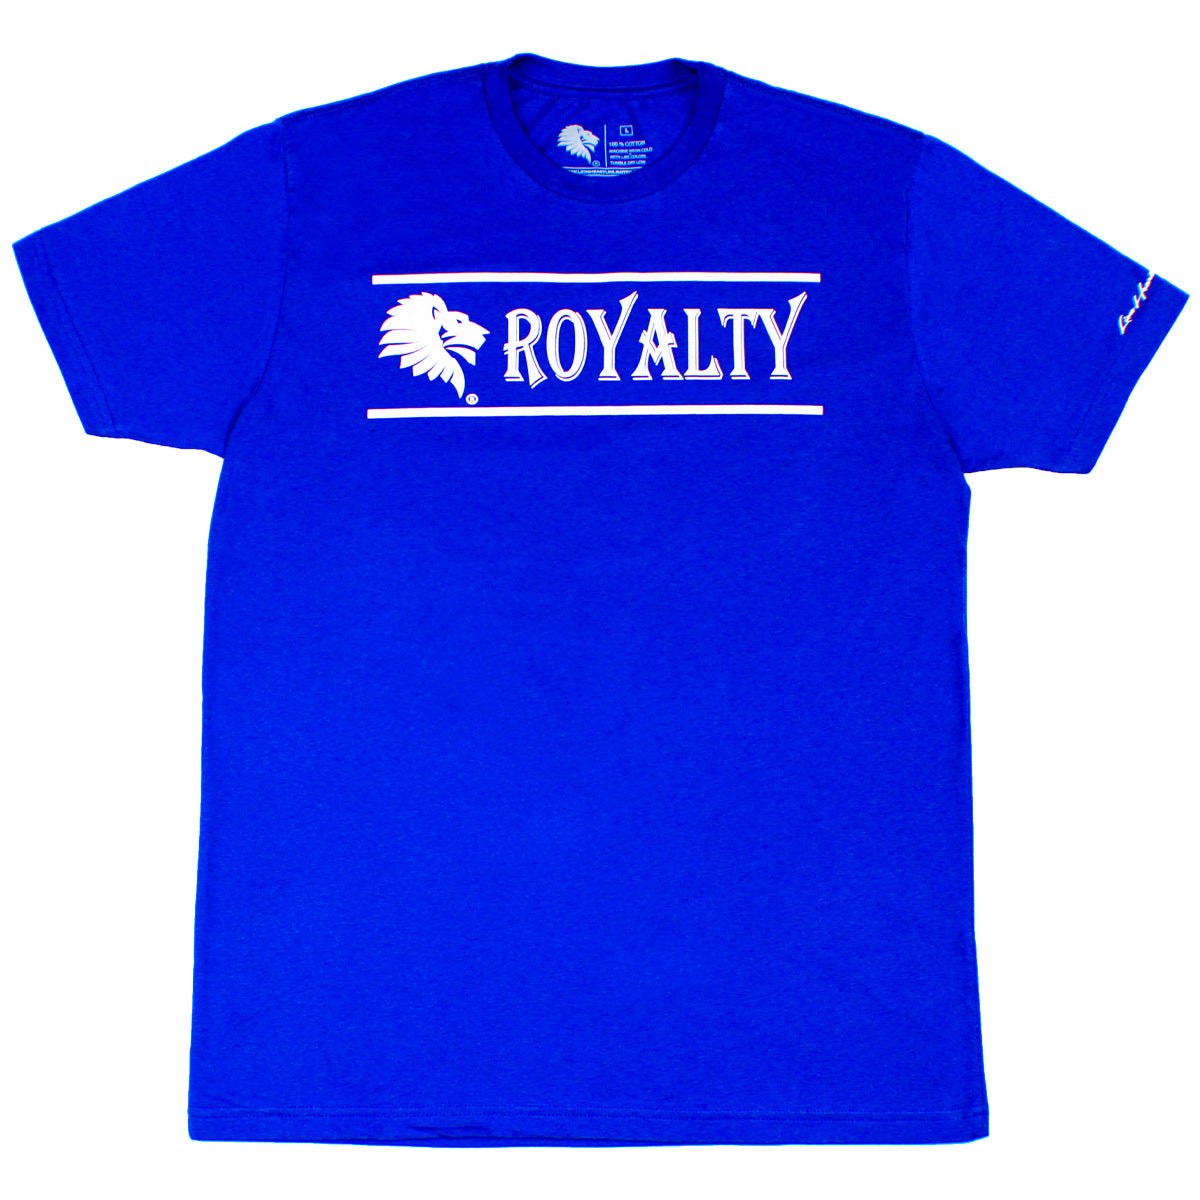 Front View - Royalty T-shirt - Royal Blue t-shirt with the LHU Logo in front of the word Royalty in all capital letters. You are Royalty because You are a Child of God. You possess an inherited Birth Right as a Descendant of the King of Kings. You are a Member of God's Sovereign Family!